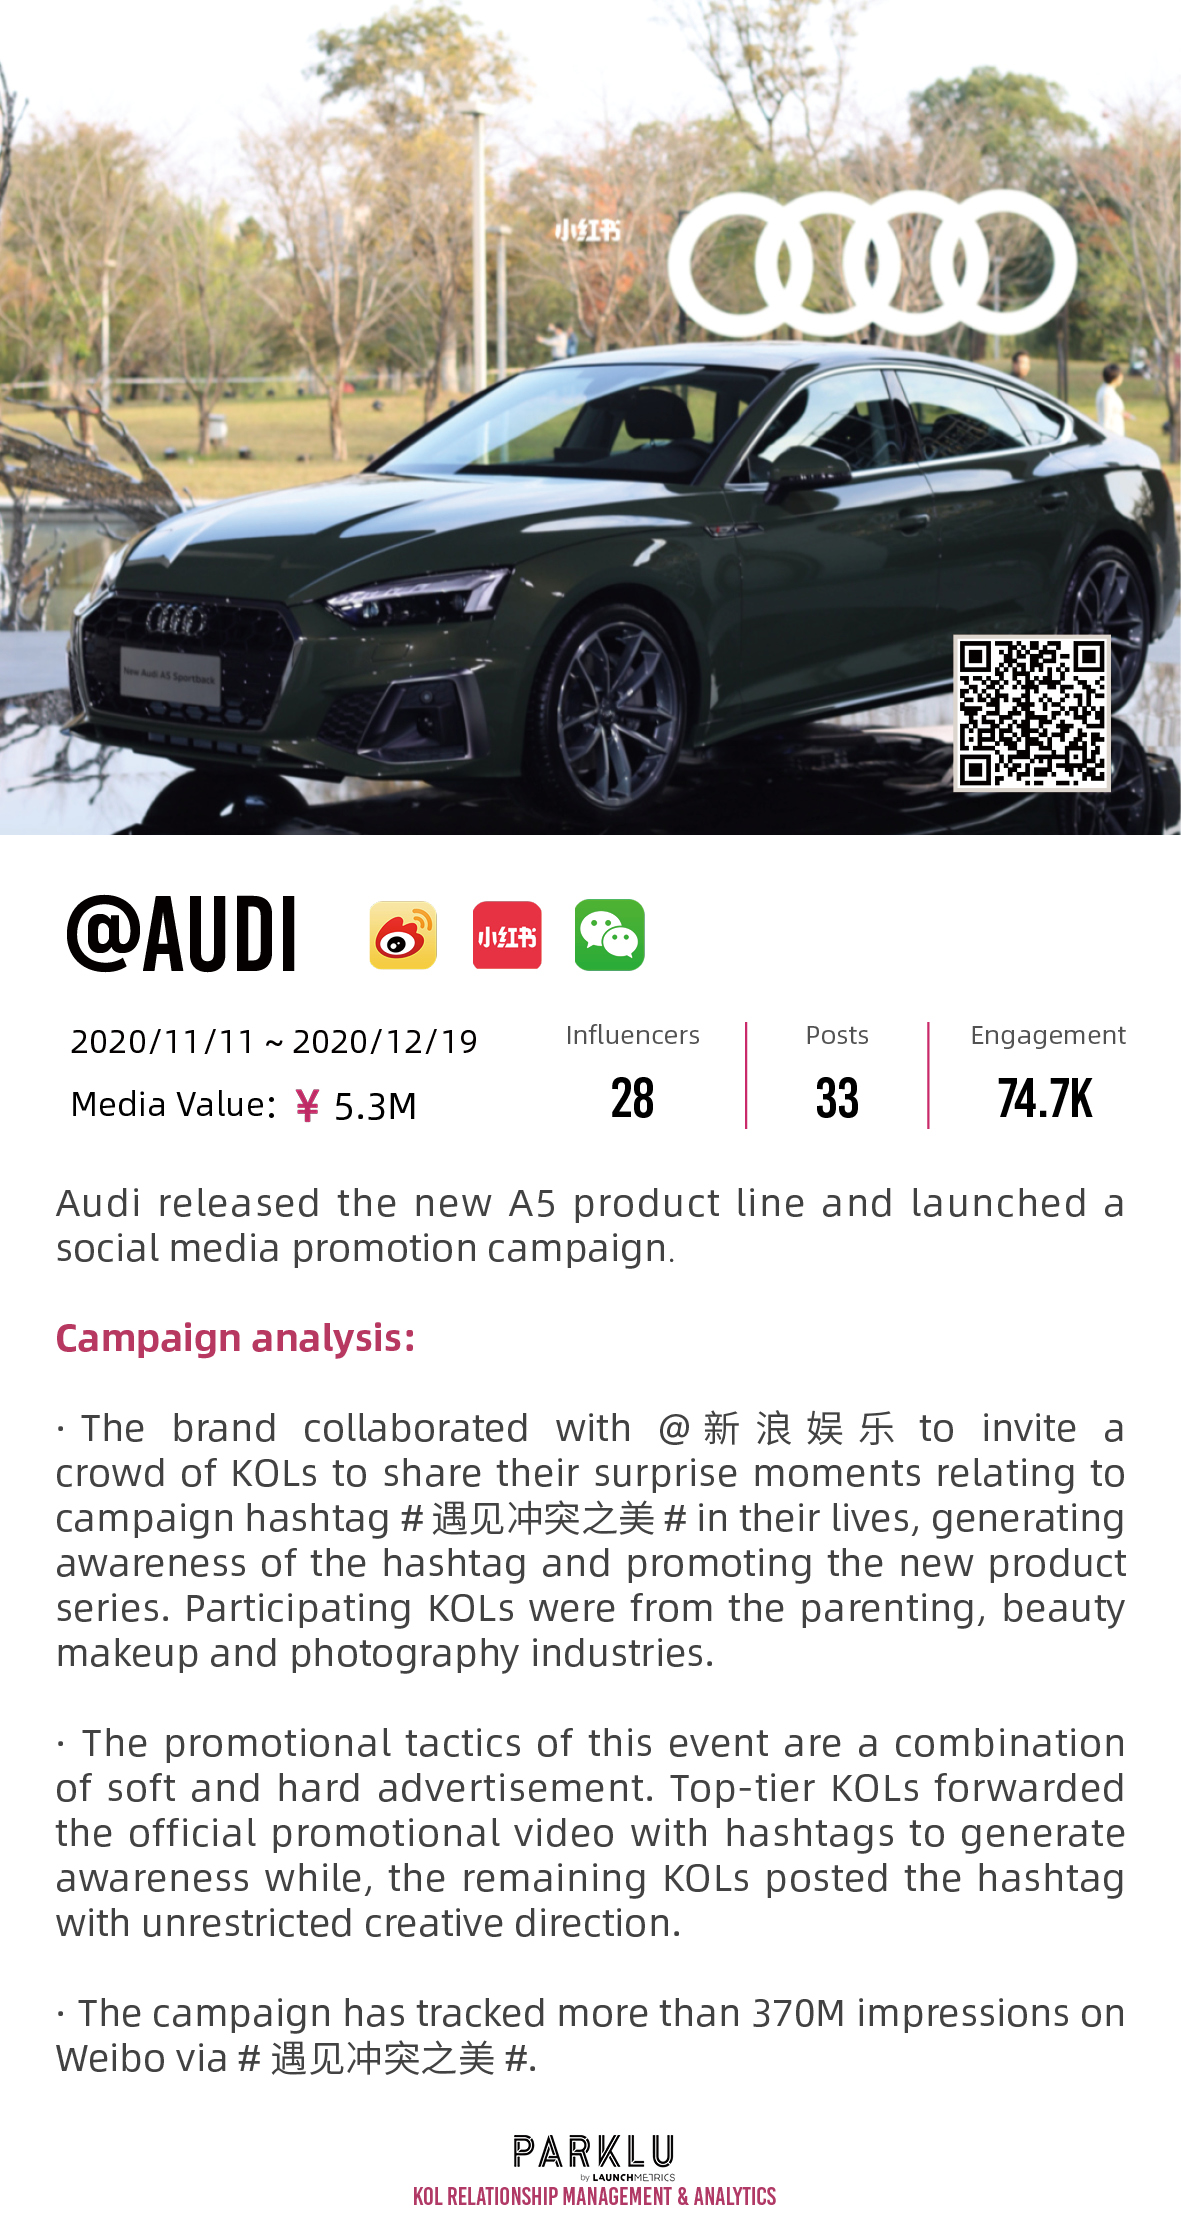 Audi released the new A5 product line and launched a social media promotion campaign